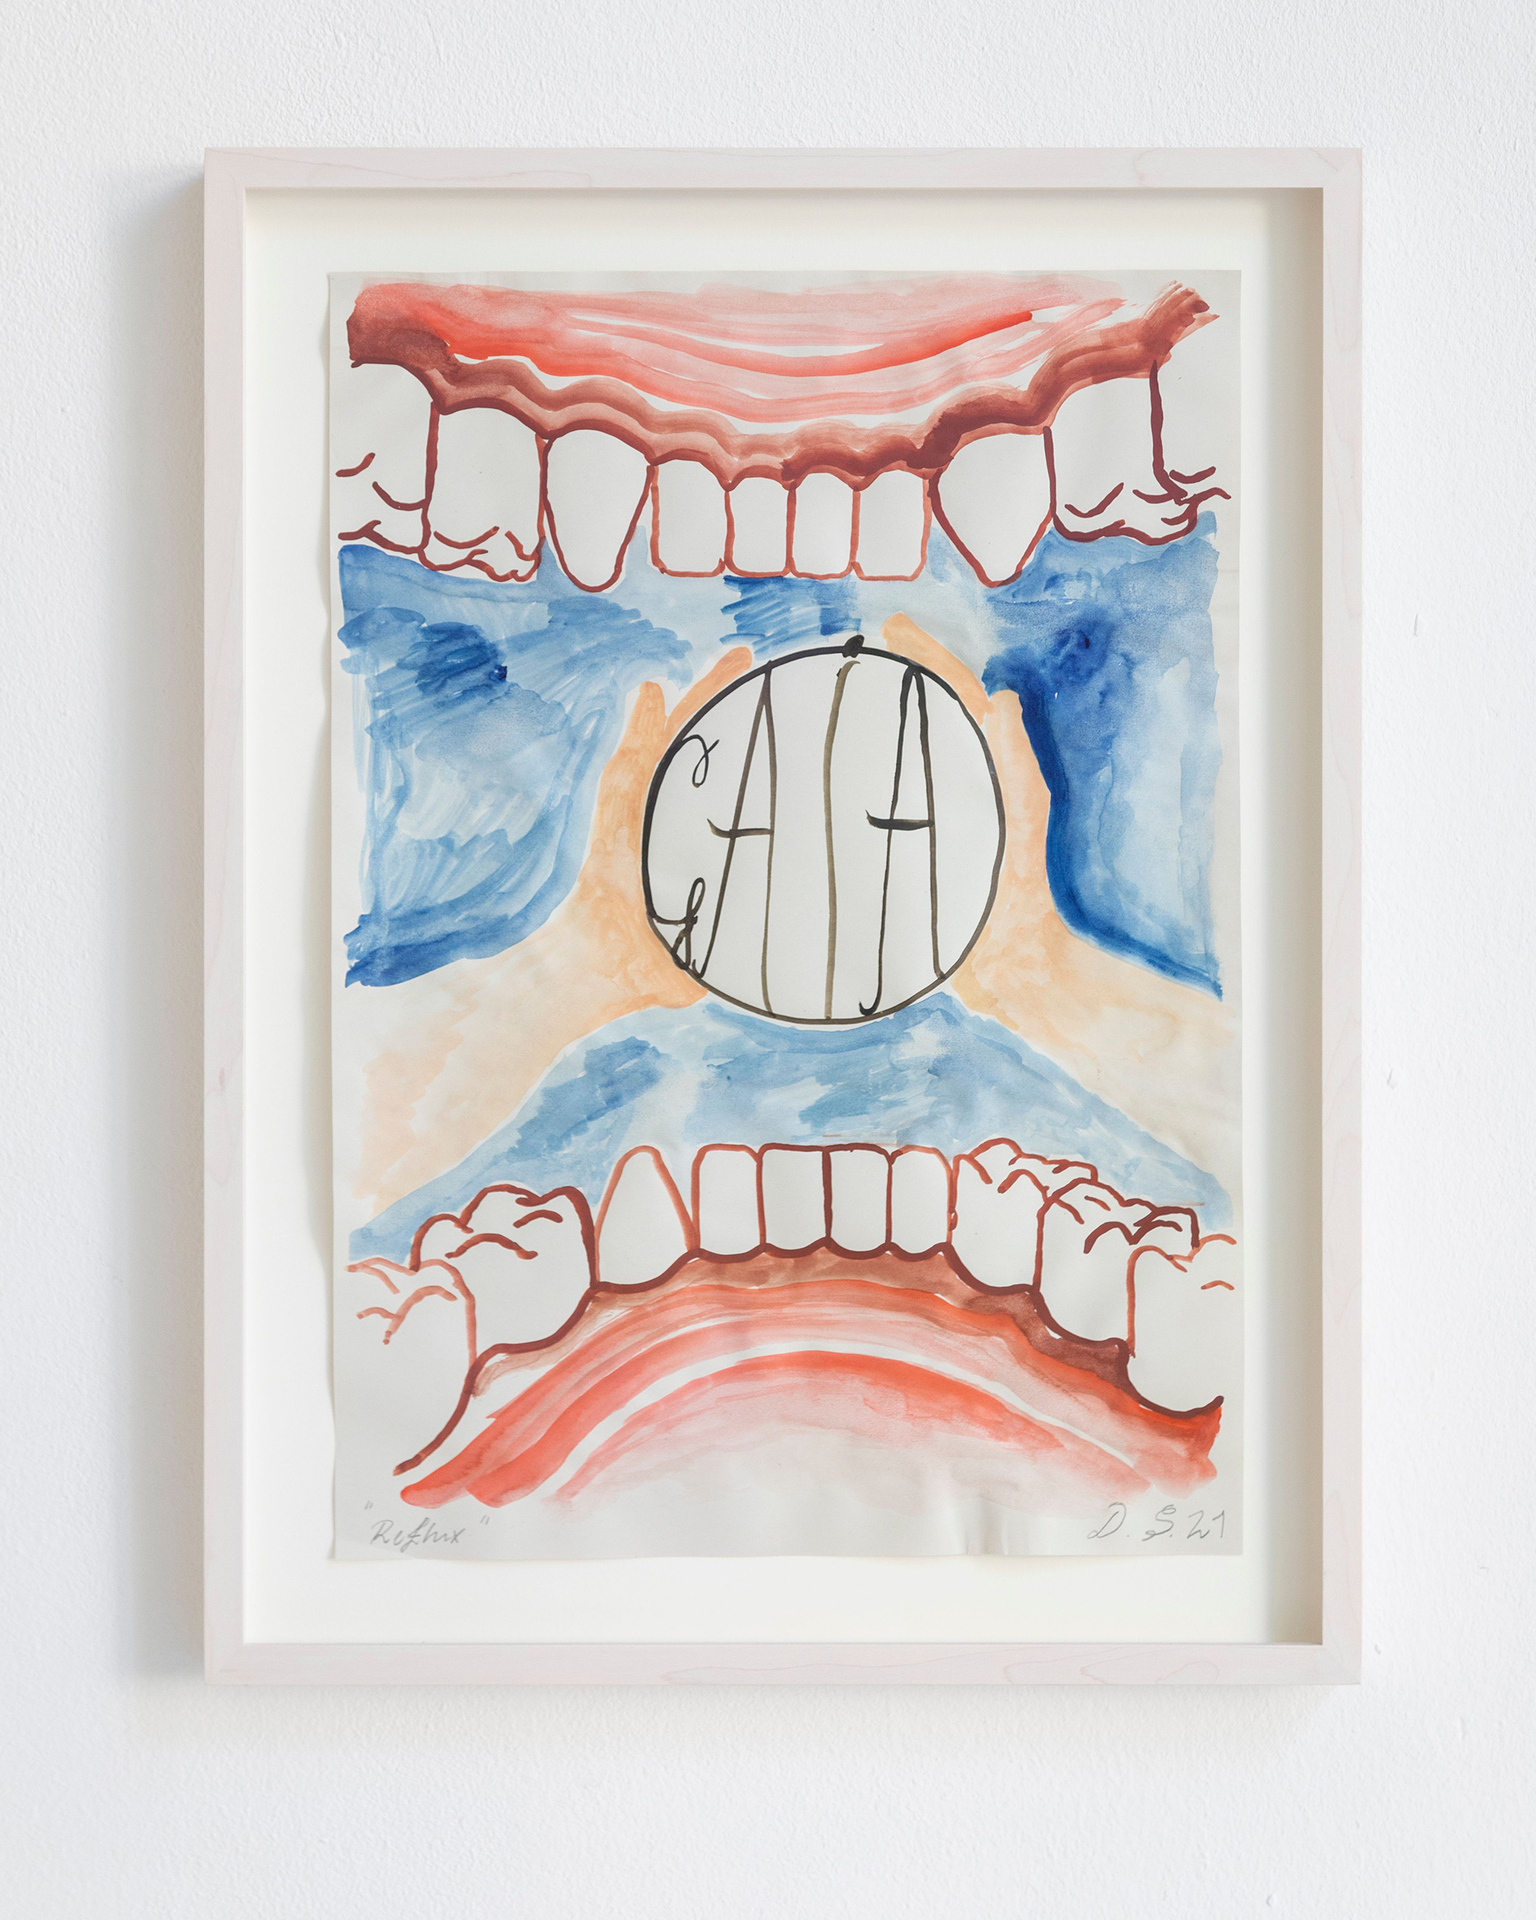 David Schiesser, Reflux, 2021, Watercolor drawing on paper, Mounted and framed, 29,5 x 41,7 cm